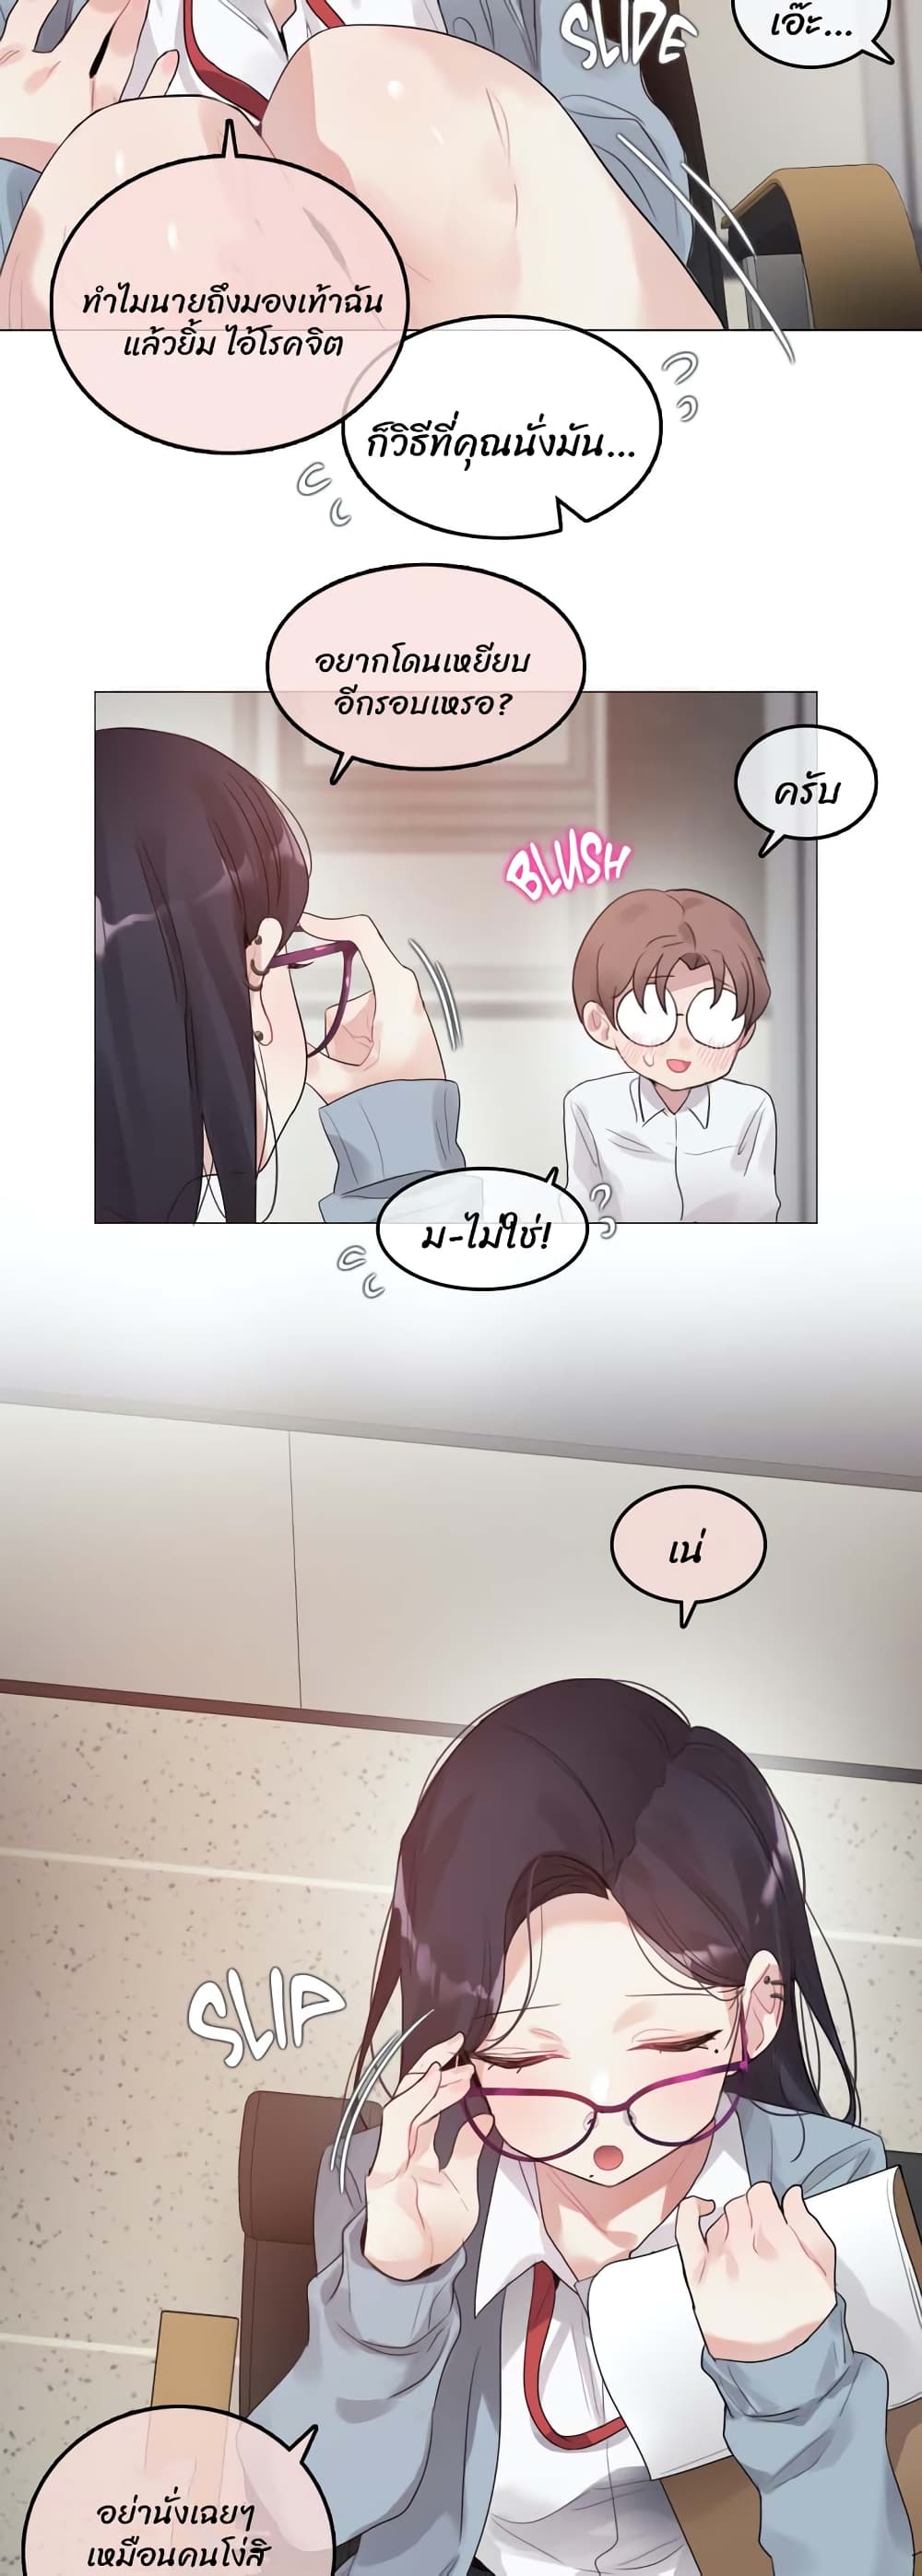 A Pervert’s Daily Life 101 05